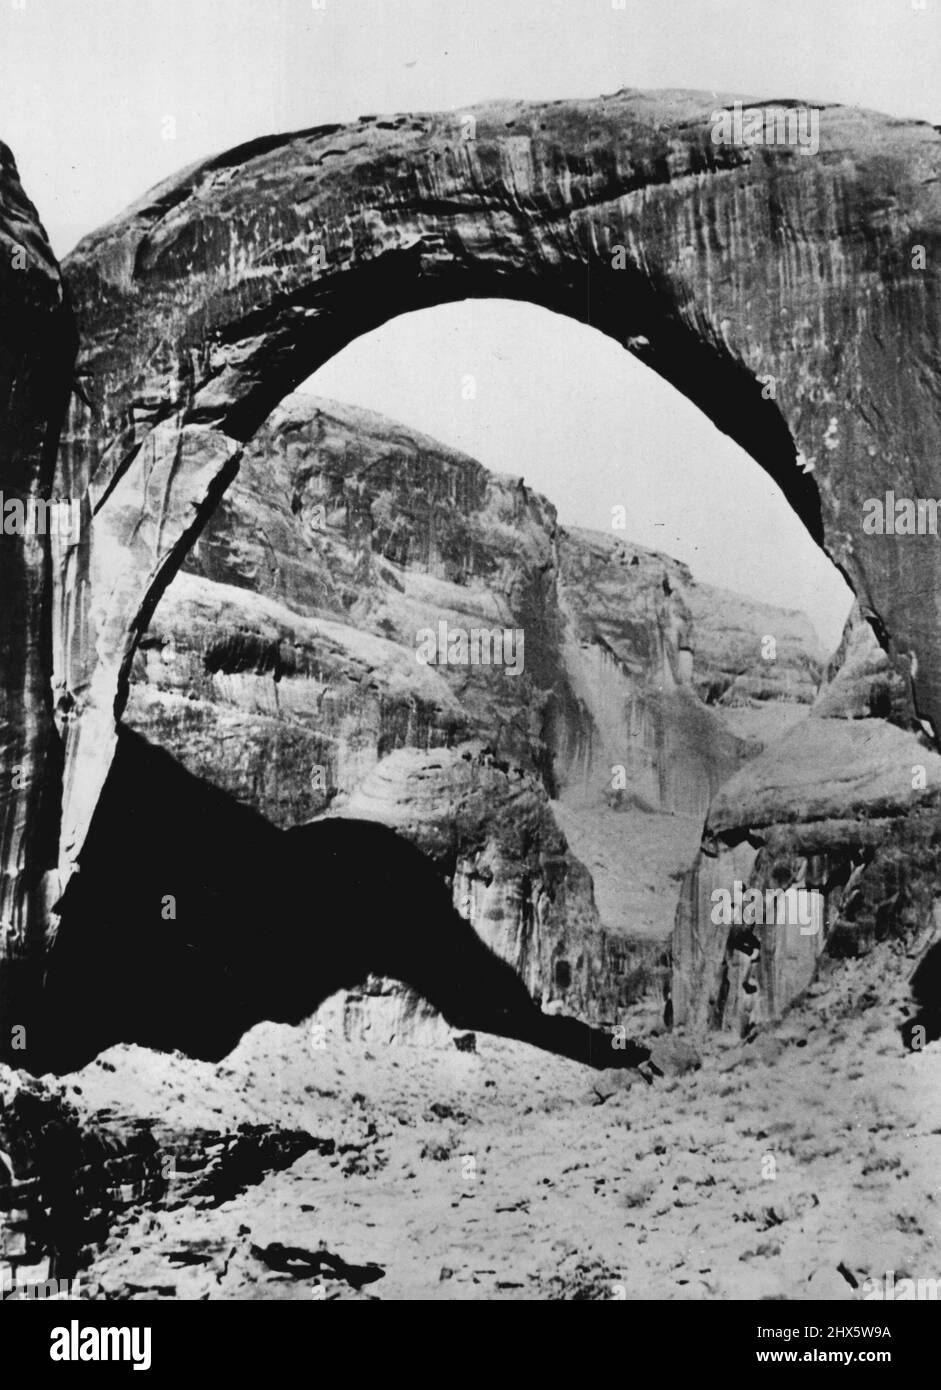 A creature 308 feet high could walk under Utah's Rainbow Bridge, the highest Natural Bridge in the world. Located close to the Arizona Border, it stands amidst rocky Canyons. August 29, 1952. (Photo by United Press). Stock Photo